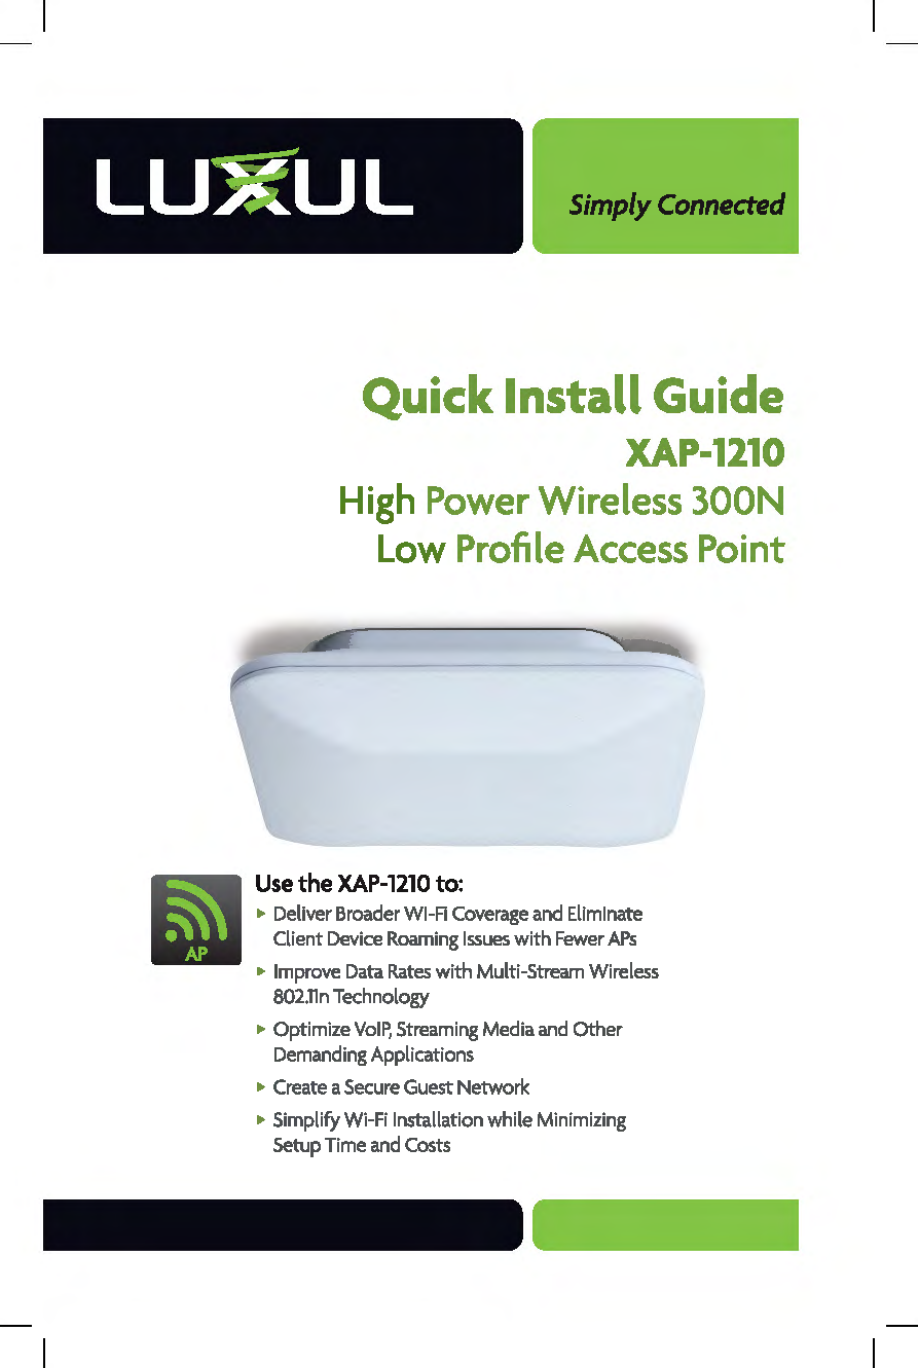 Simply Connected Quick Install Guide XAP-1210 High Power Wireless 300N Low Profile Access Point Use the XAP-1210 to: • Deliver Broader WI-Fl Coverage and Eliminate Client Device Roaming Issues with Fewer APs • Improve Data Rates with Multi-Stream Wireless 802.lln Technology • Optimize VoIP, Streaming Media and Other Demanding Applications • Create a Secure Guest Network • Simplify Wi-Fi Installation while Minimizing Setup Time and Costs 